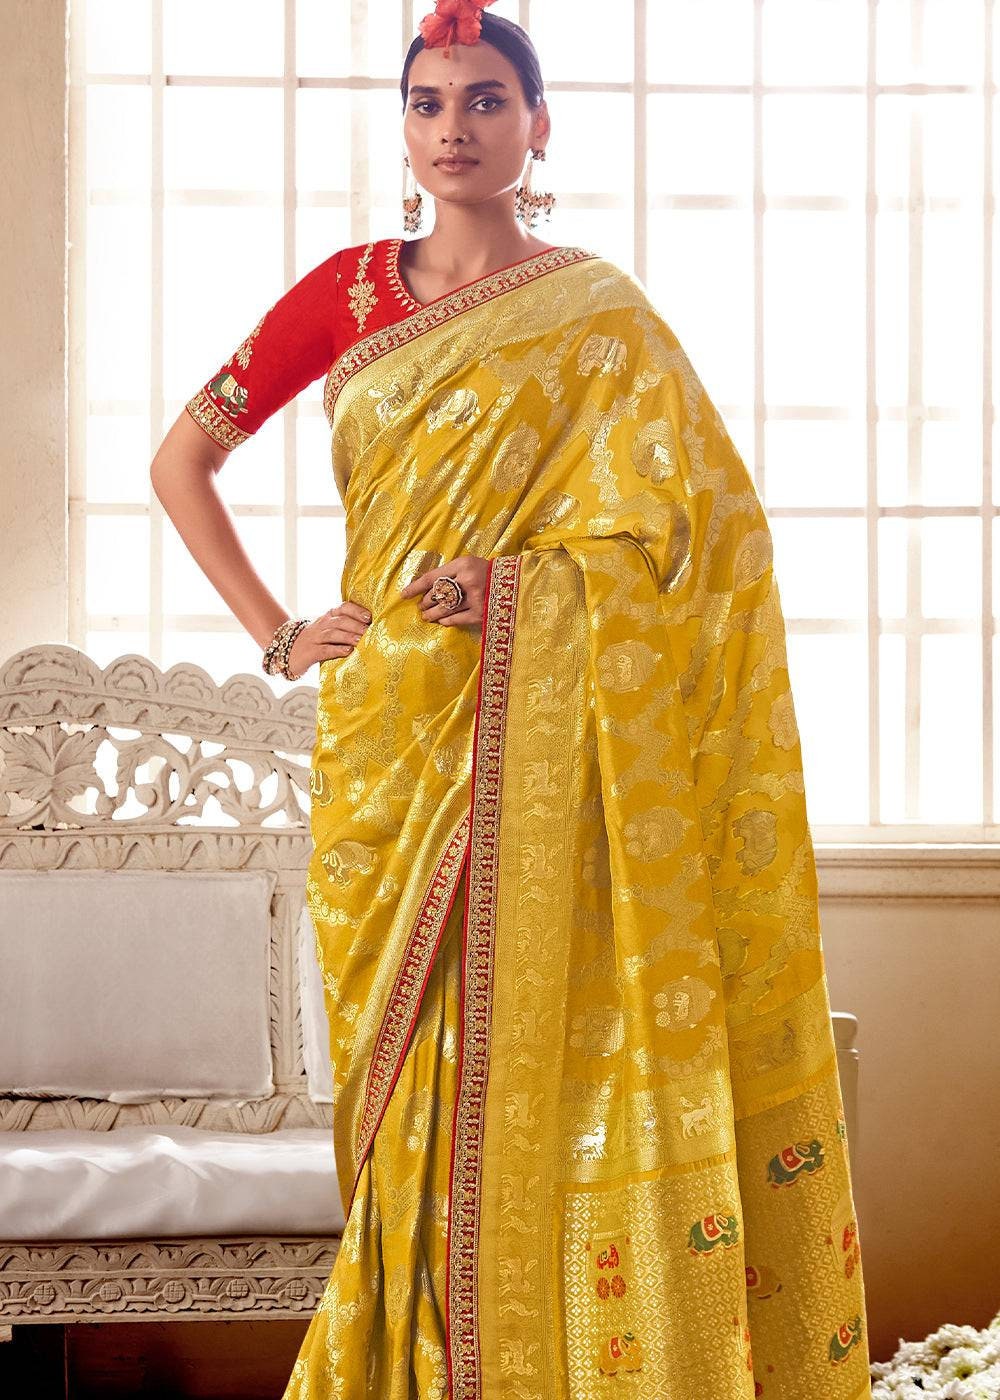 Yellow Color Satin Silk Saree With Blouse and Embroidery Work Belt and Lace